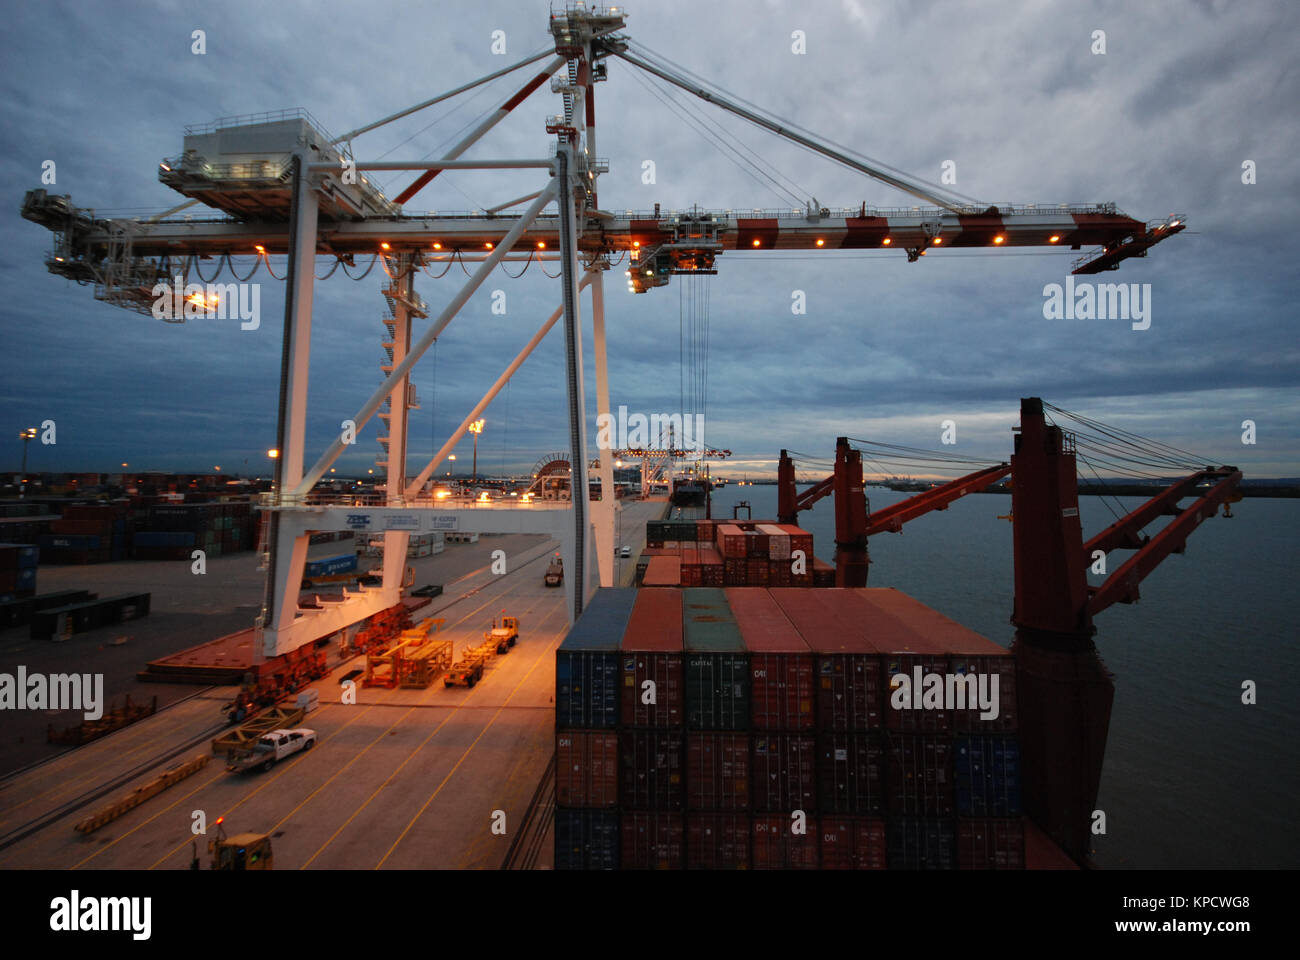 Fisherman Island Container Terminal Viewed from Ship's Bridge Stock Photo